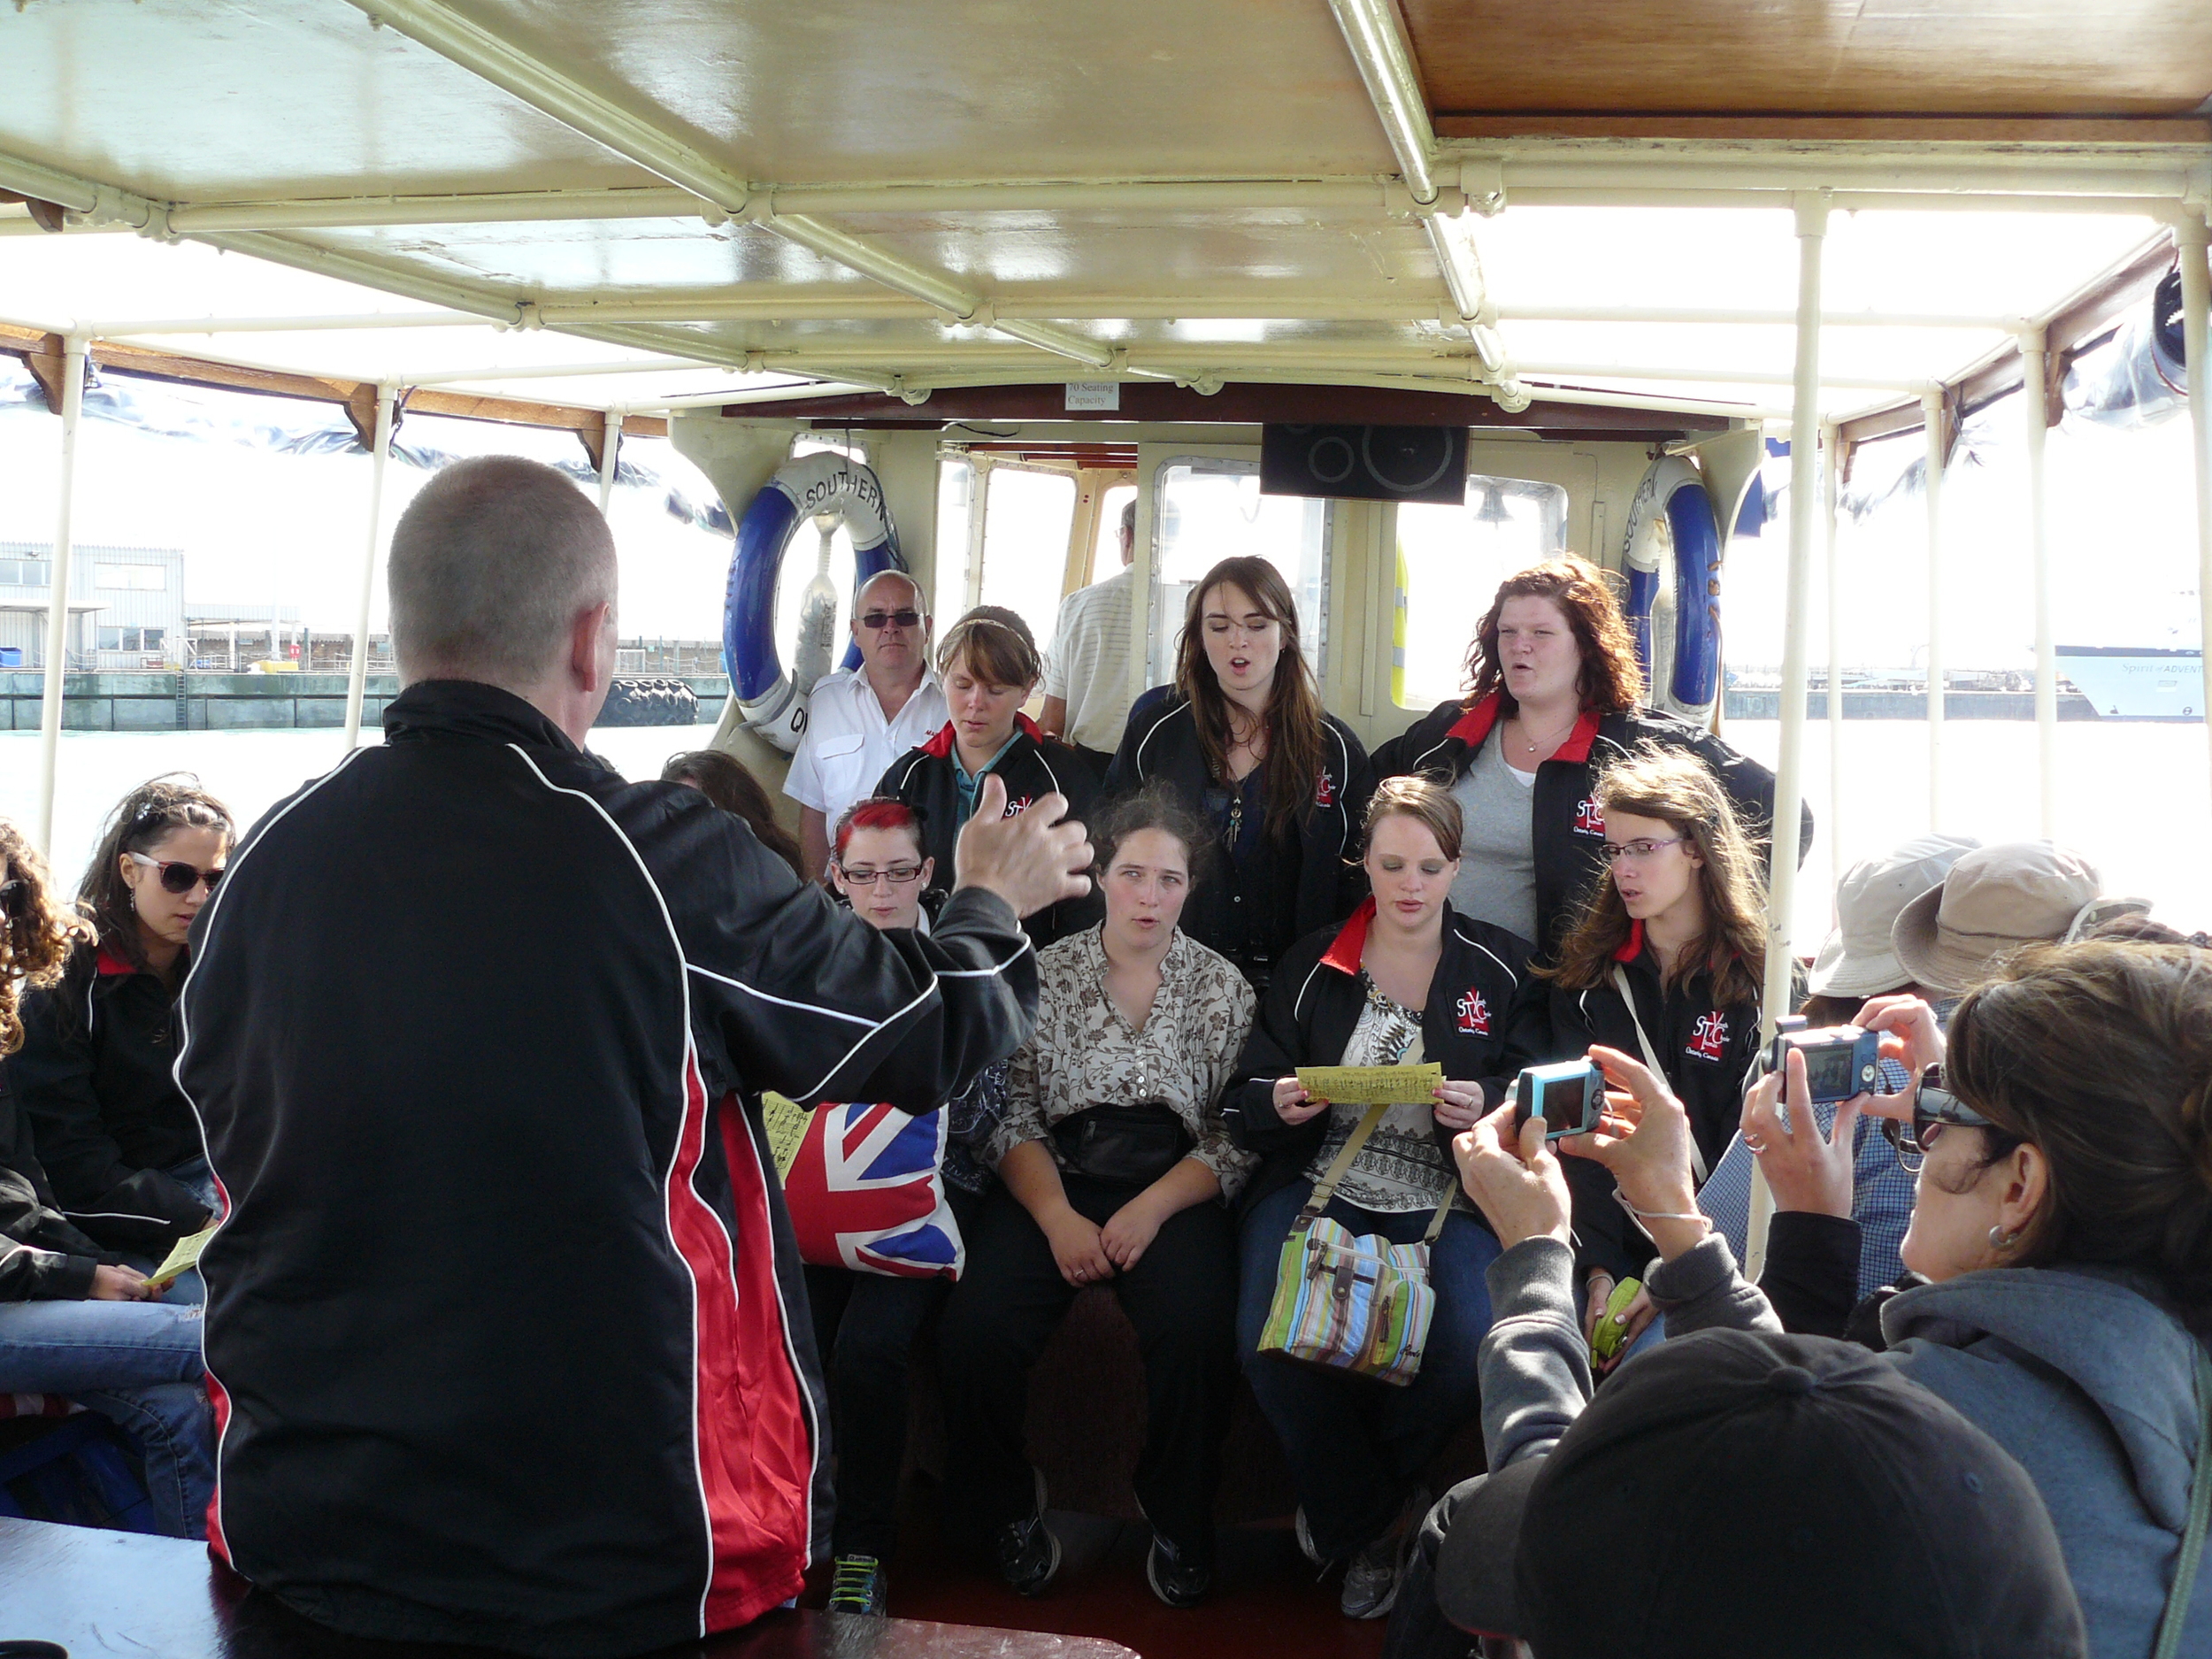  Performing "White Cliffs of Dover" on a boat just out from the cliffs themselves.​ 